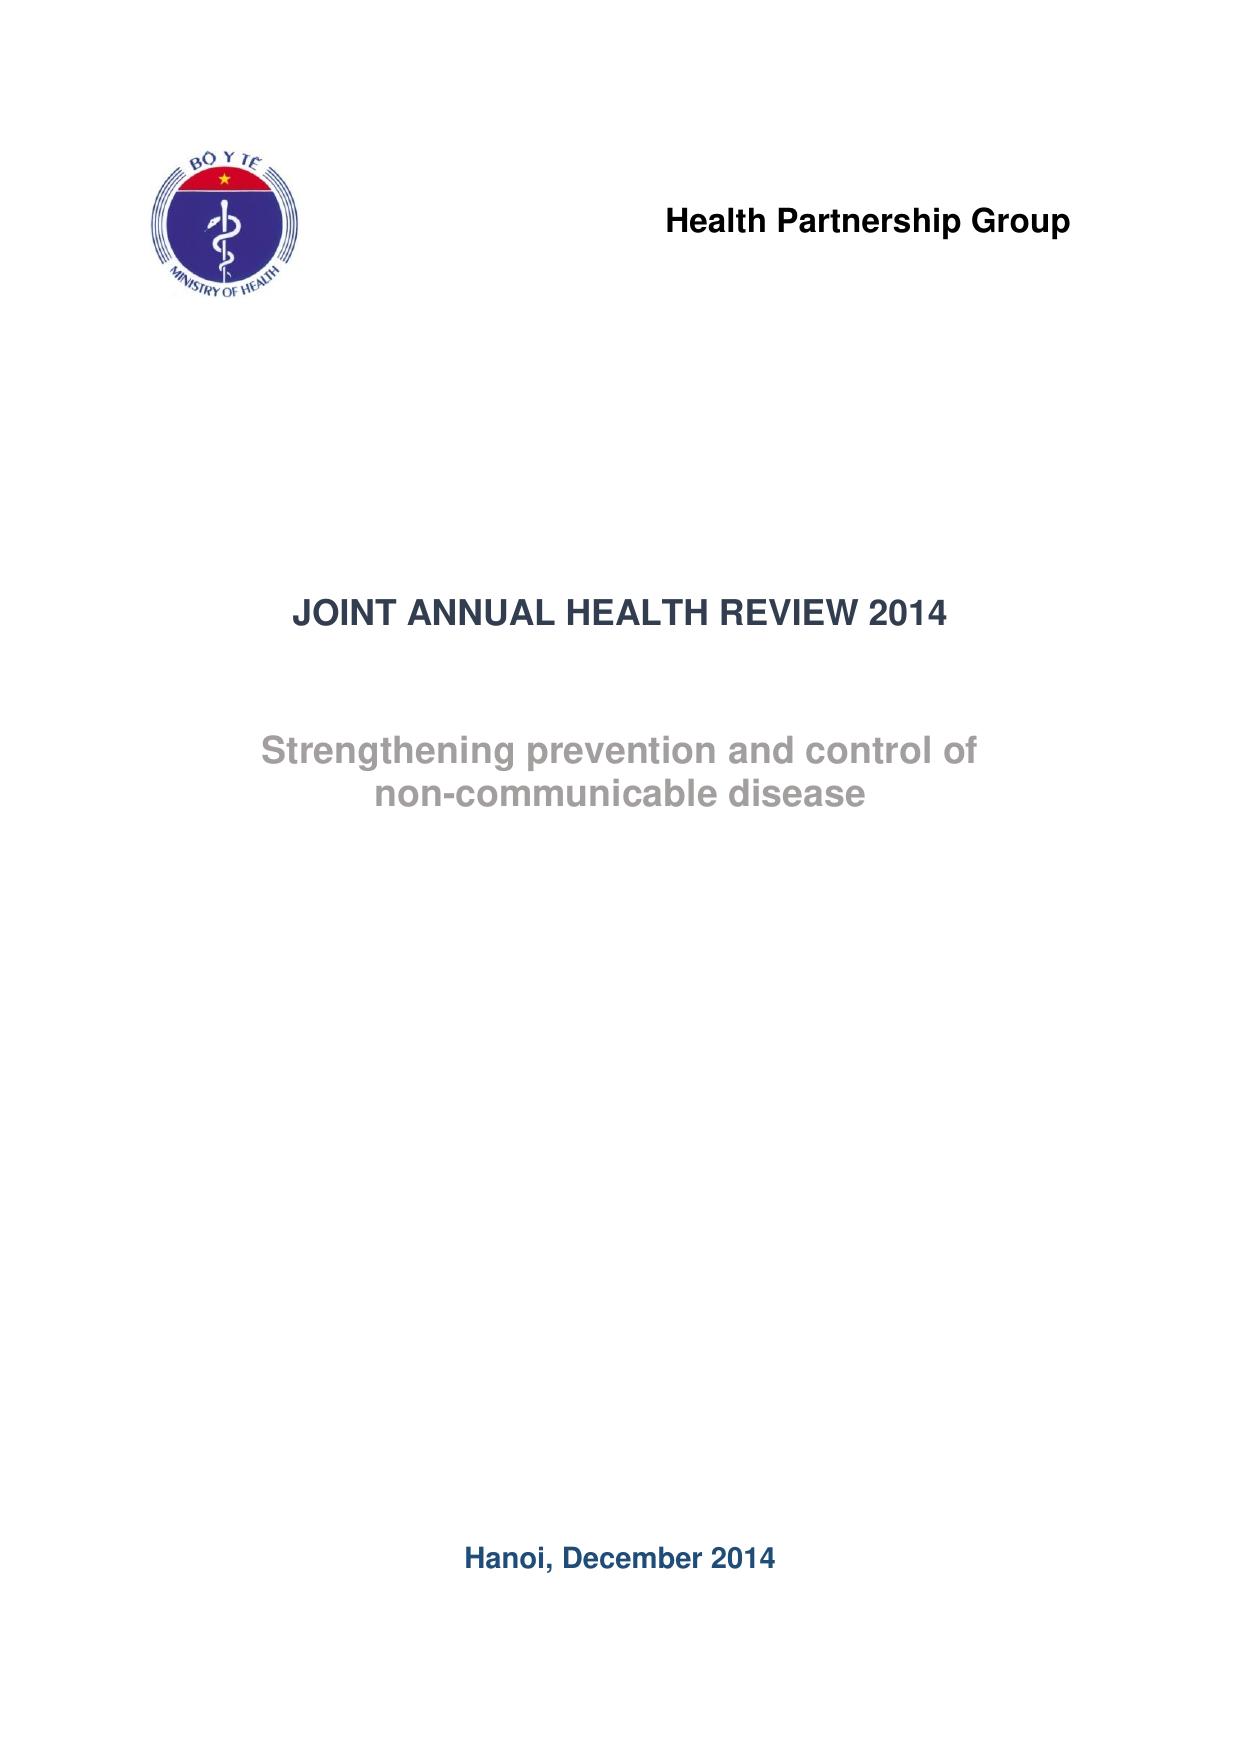 Strengthening prevention and control of non-communicable disease 2015